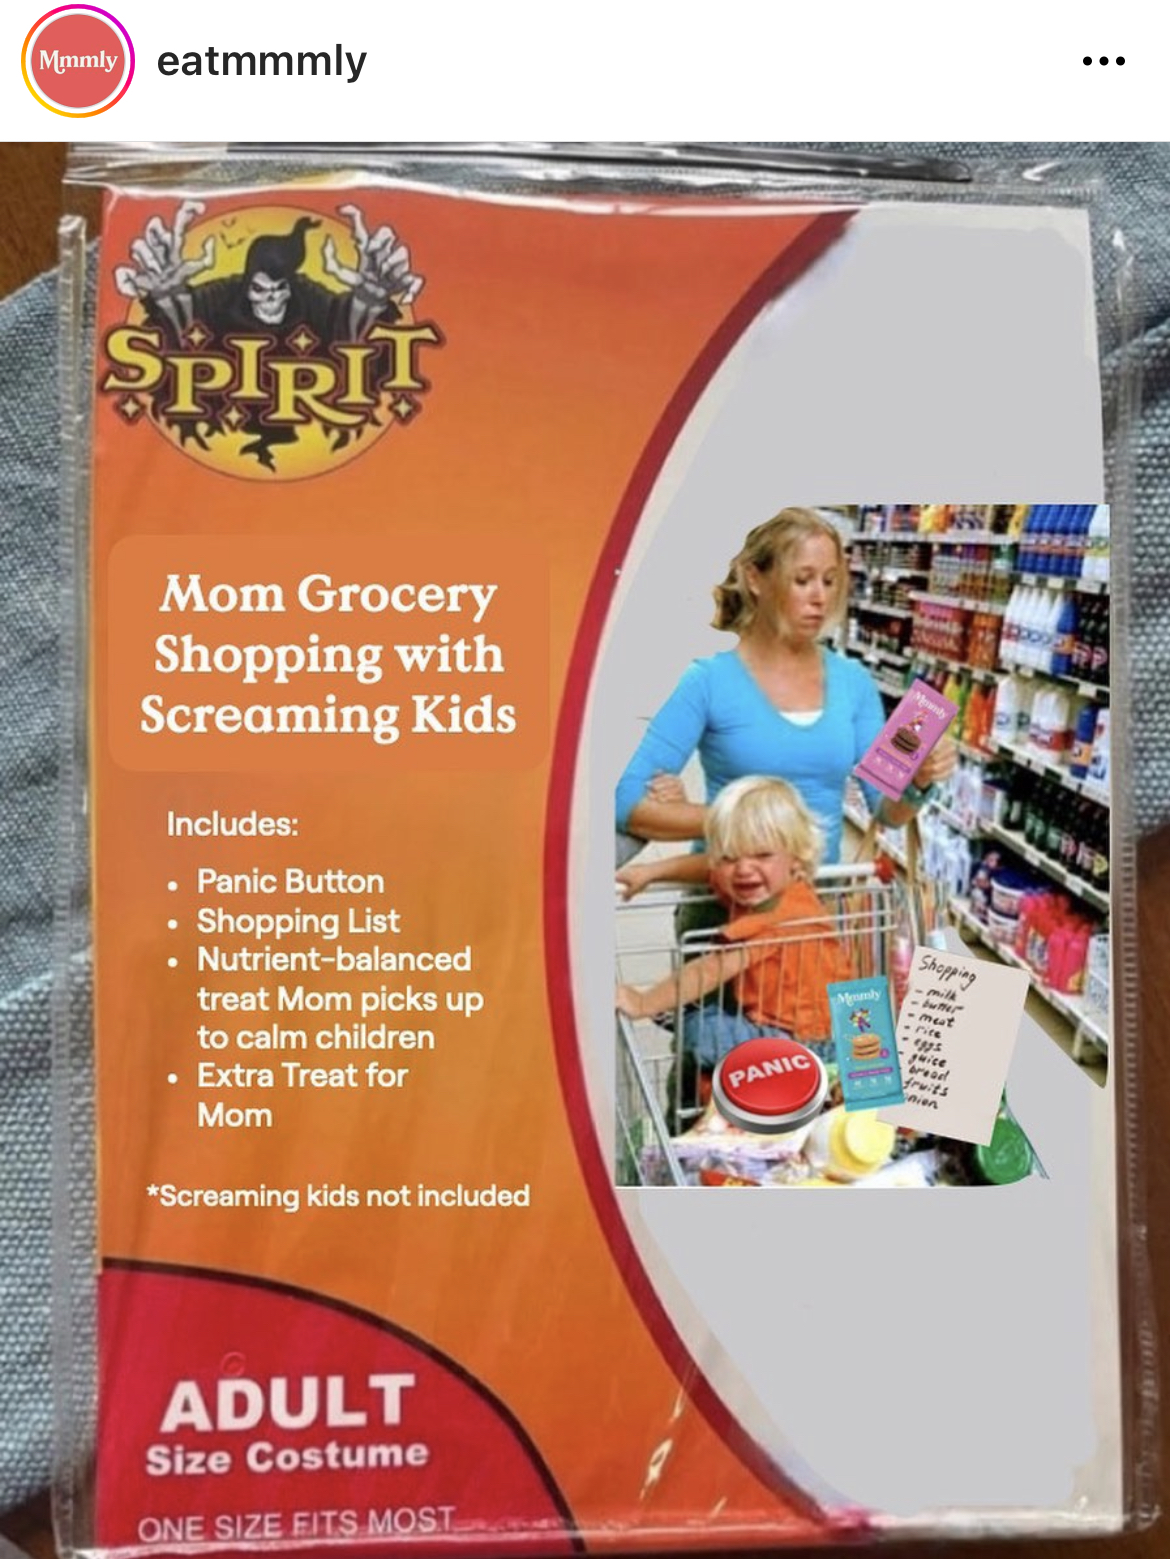 Costume Memes - spirit halloween - Mmmly eatmmmly S C Spirit Mom Grocery Shopping with Screaming Kids Includes . Panic Button Shopping List Nutrientbalanced treat Mom picks up to calm children Extra Treat for Mom Screaming kids not included Adult Size Cos